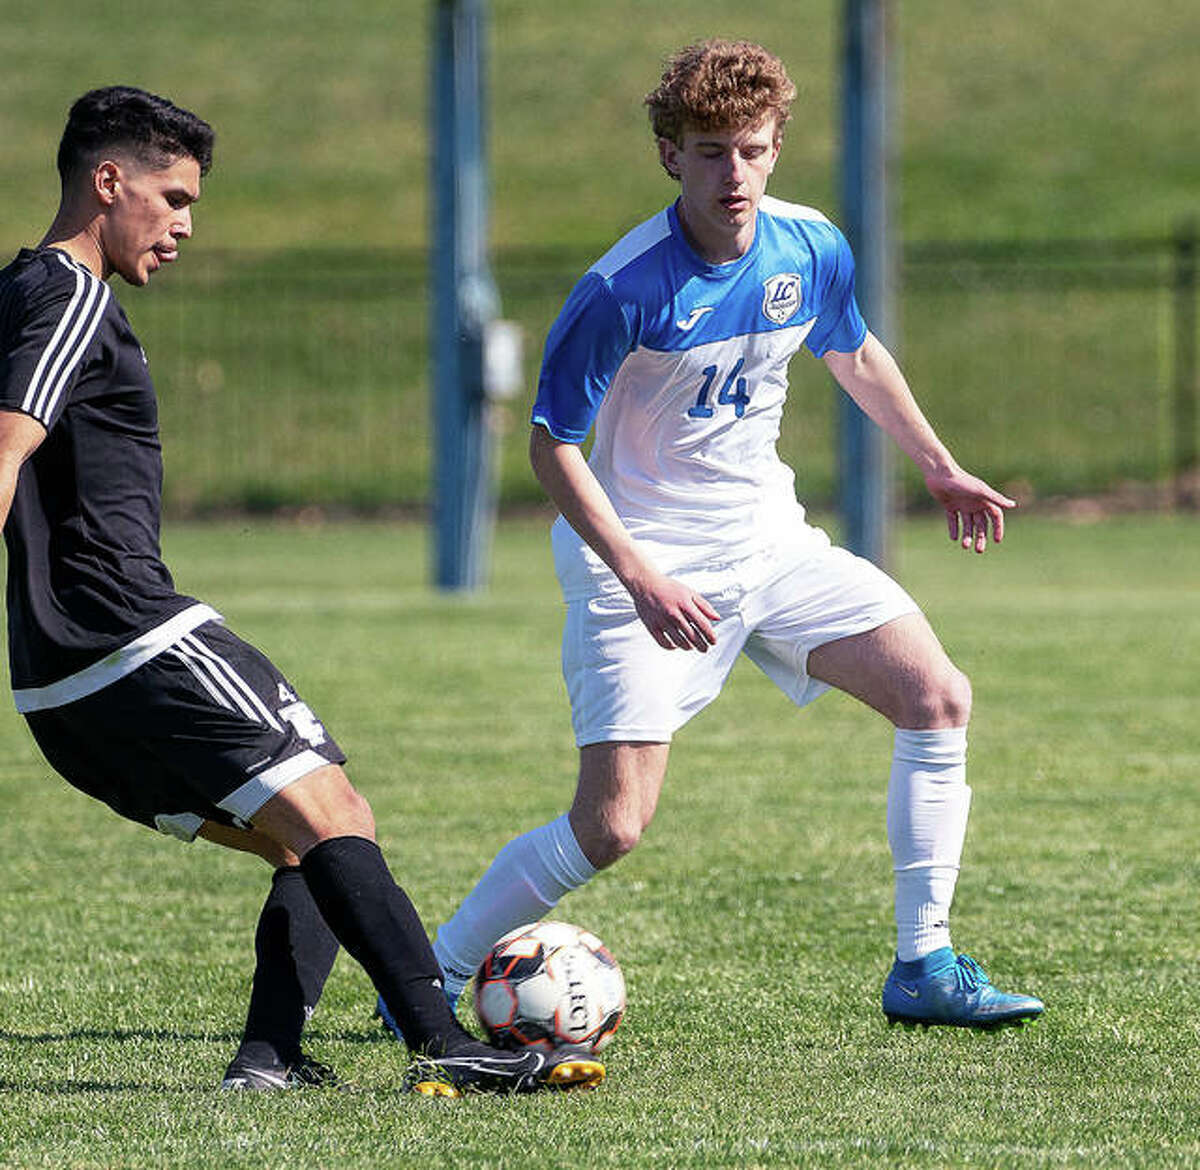 LCCC’s Brayden Decker (14), a sophomore from Alton, scored a first-half goal in his team’s 2-0 victory over College of Lake County Sunday in Grayslake. LCCC, which also won Saturday 6-1 over Oakton Community College, is 2-0 on the season.